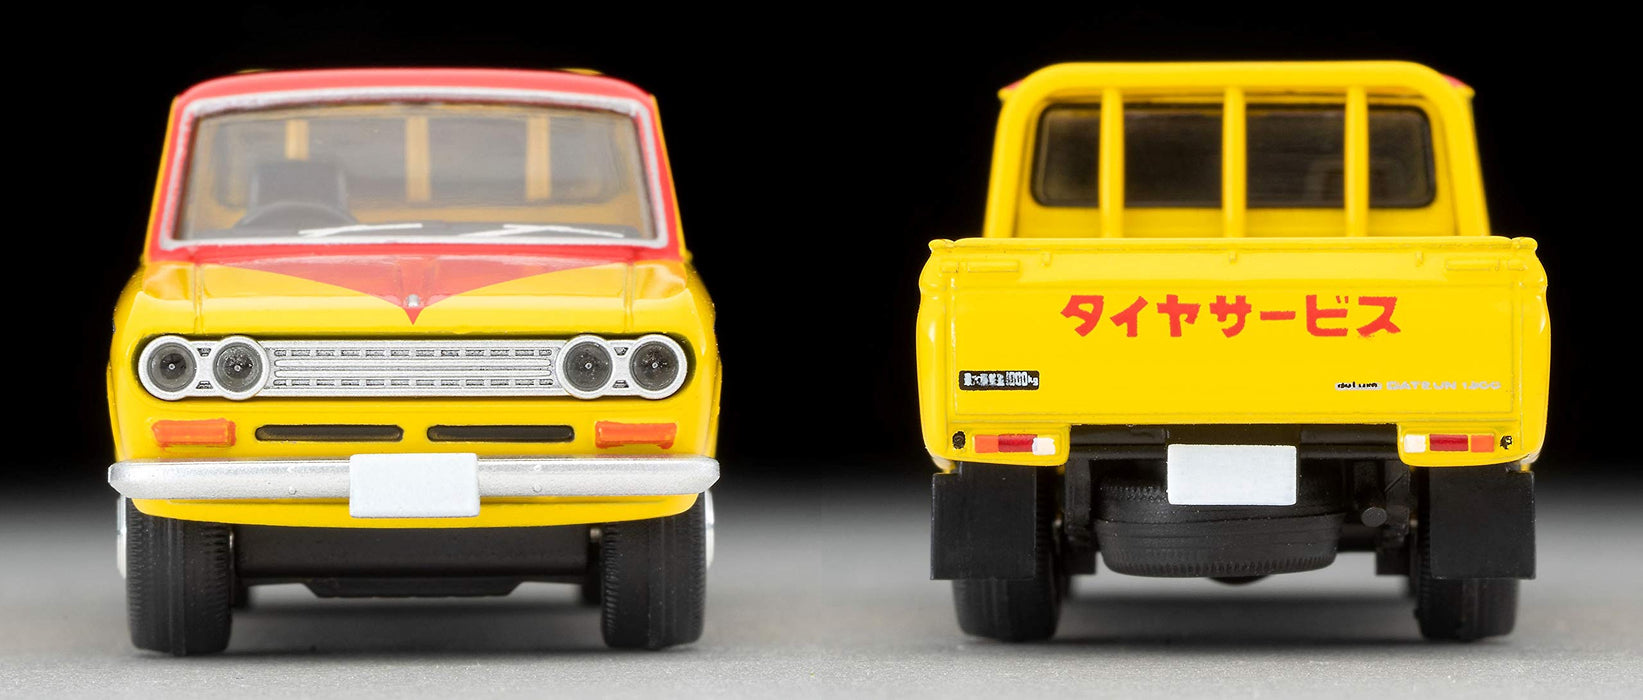 Tomytec Tomica Limited Vintage Datsun Truck 1300 Deluxe 1/64 Scale Model 316626